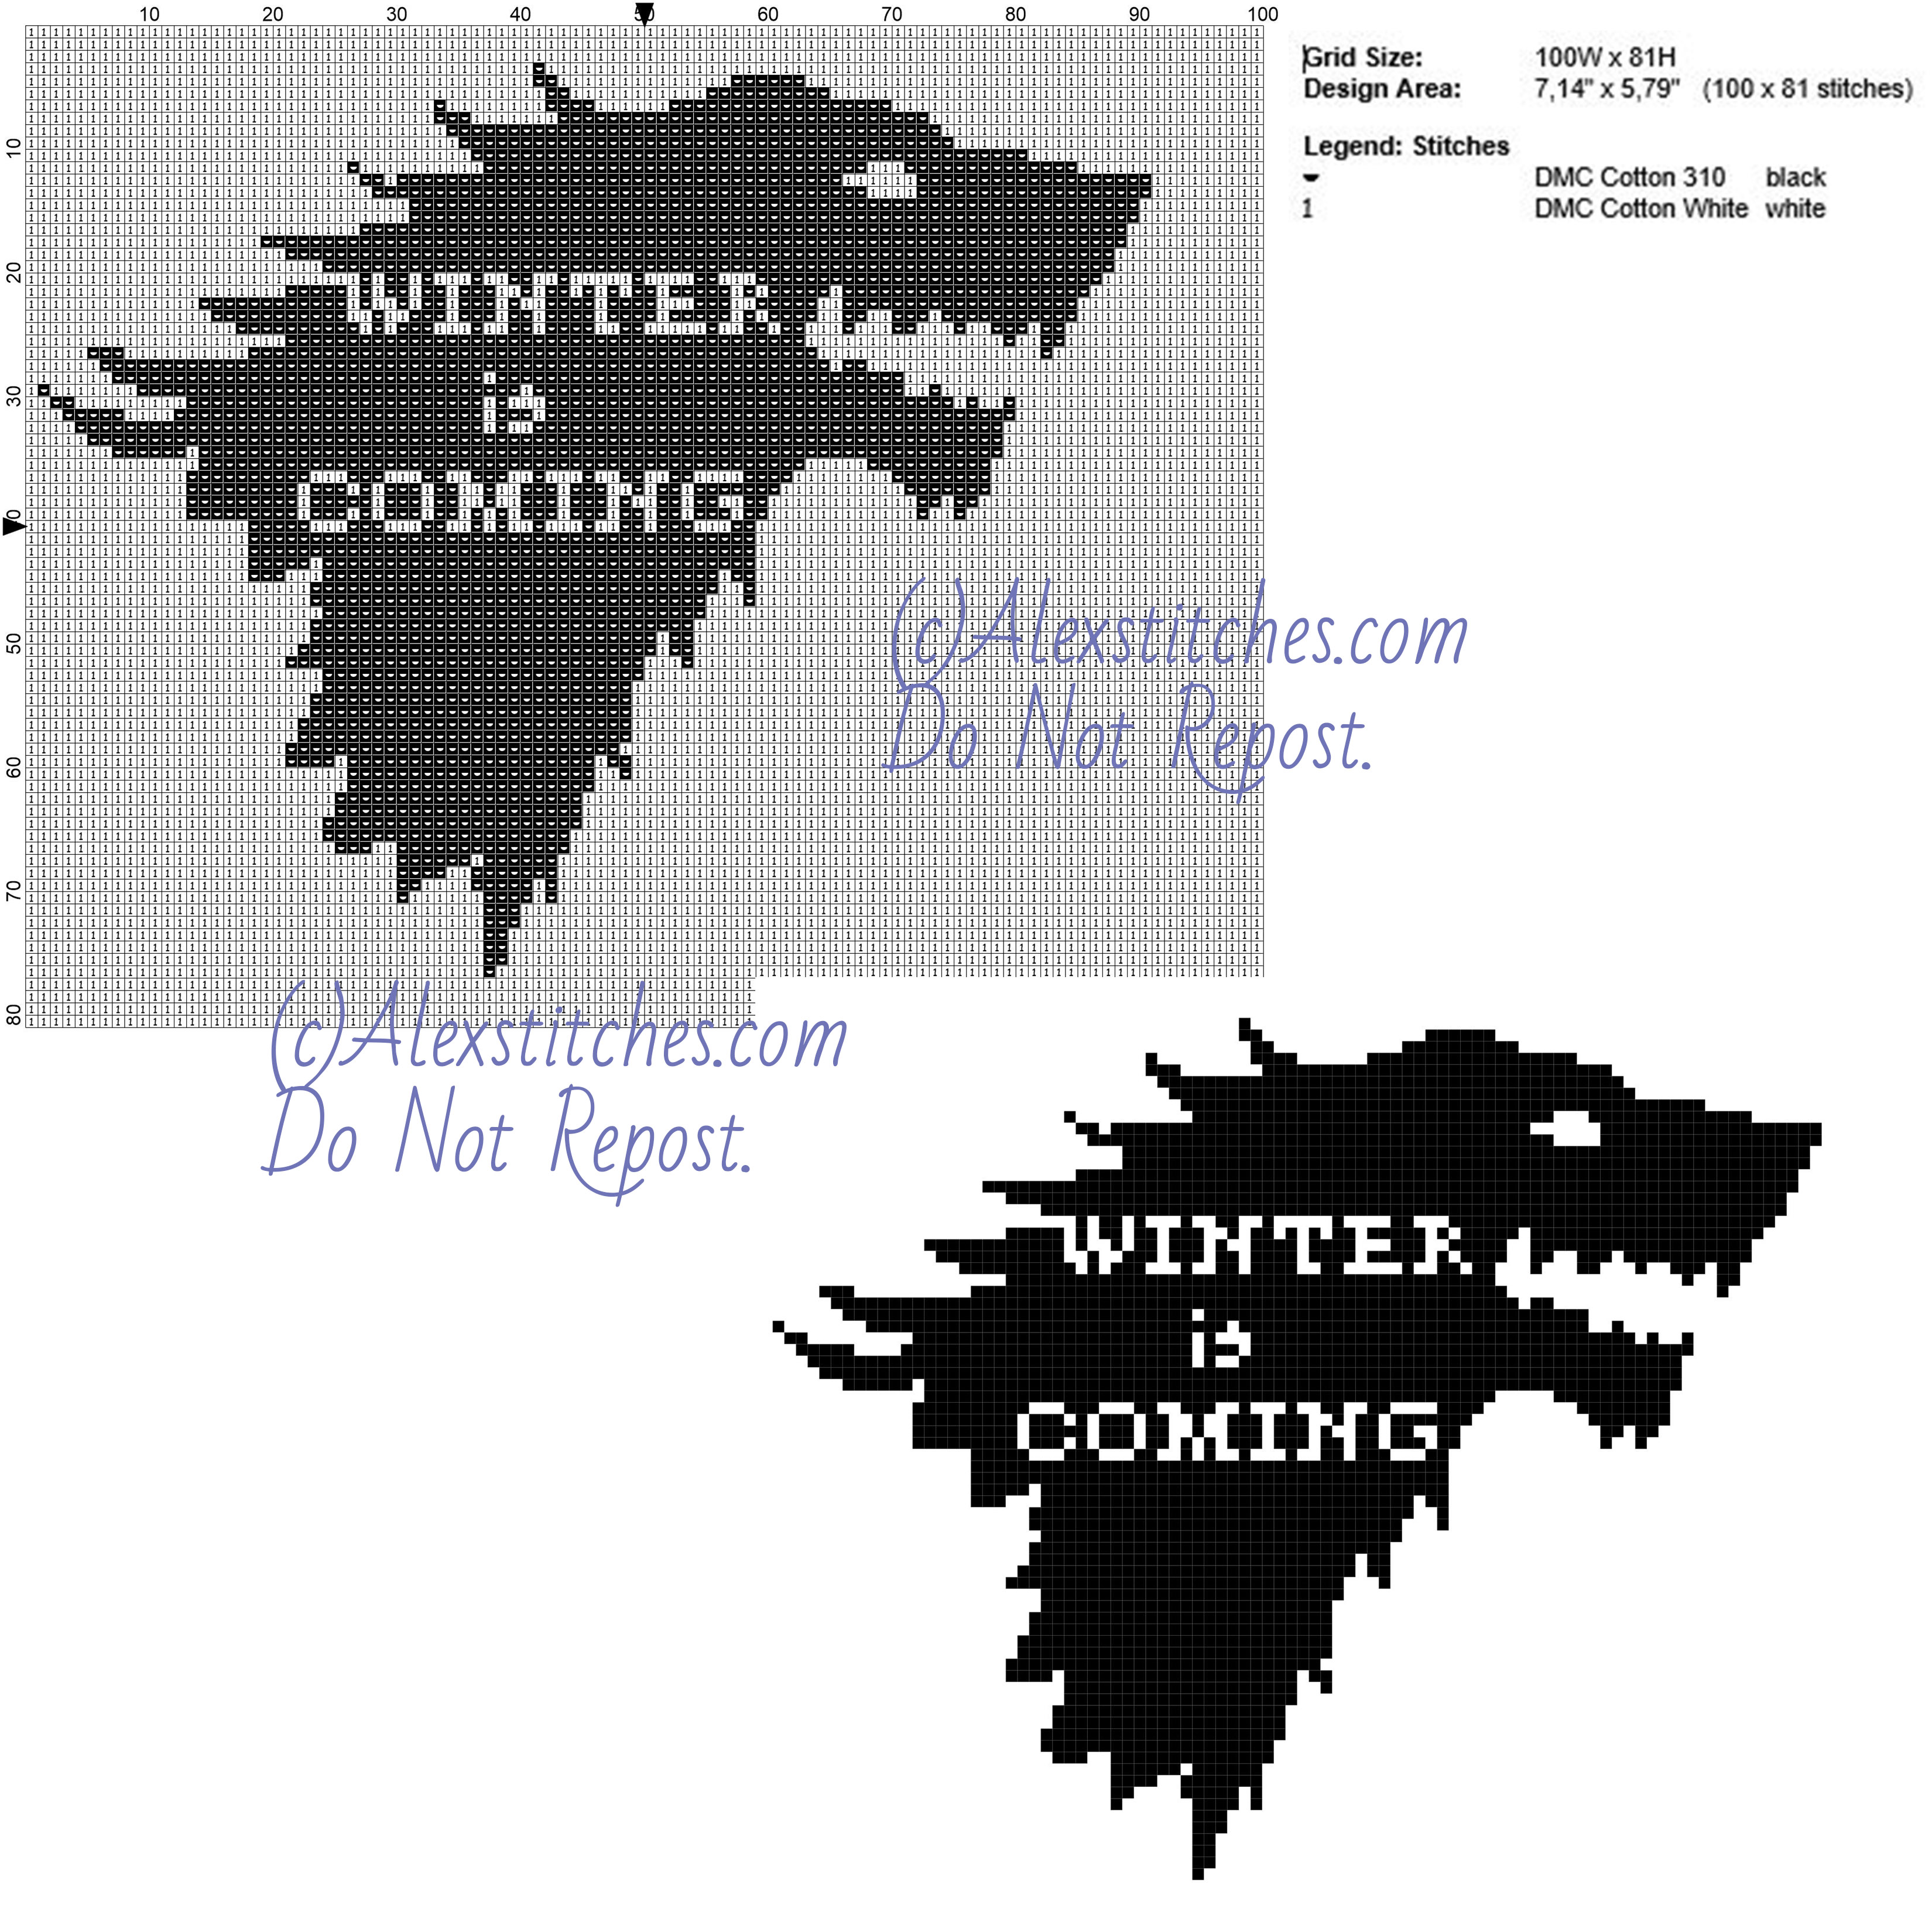 Winter is Coming Game Of Thrones free cross stitch pattern 100x80 2 colors-01